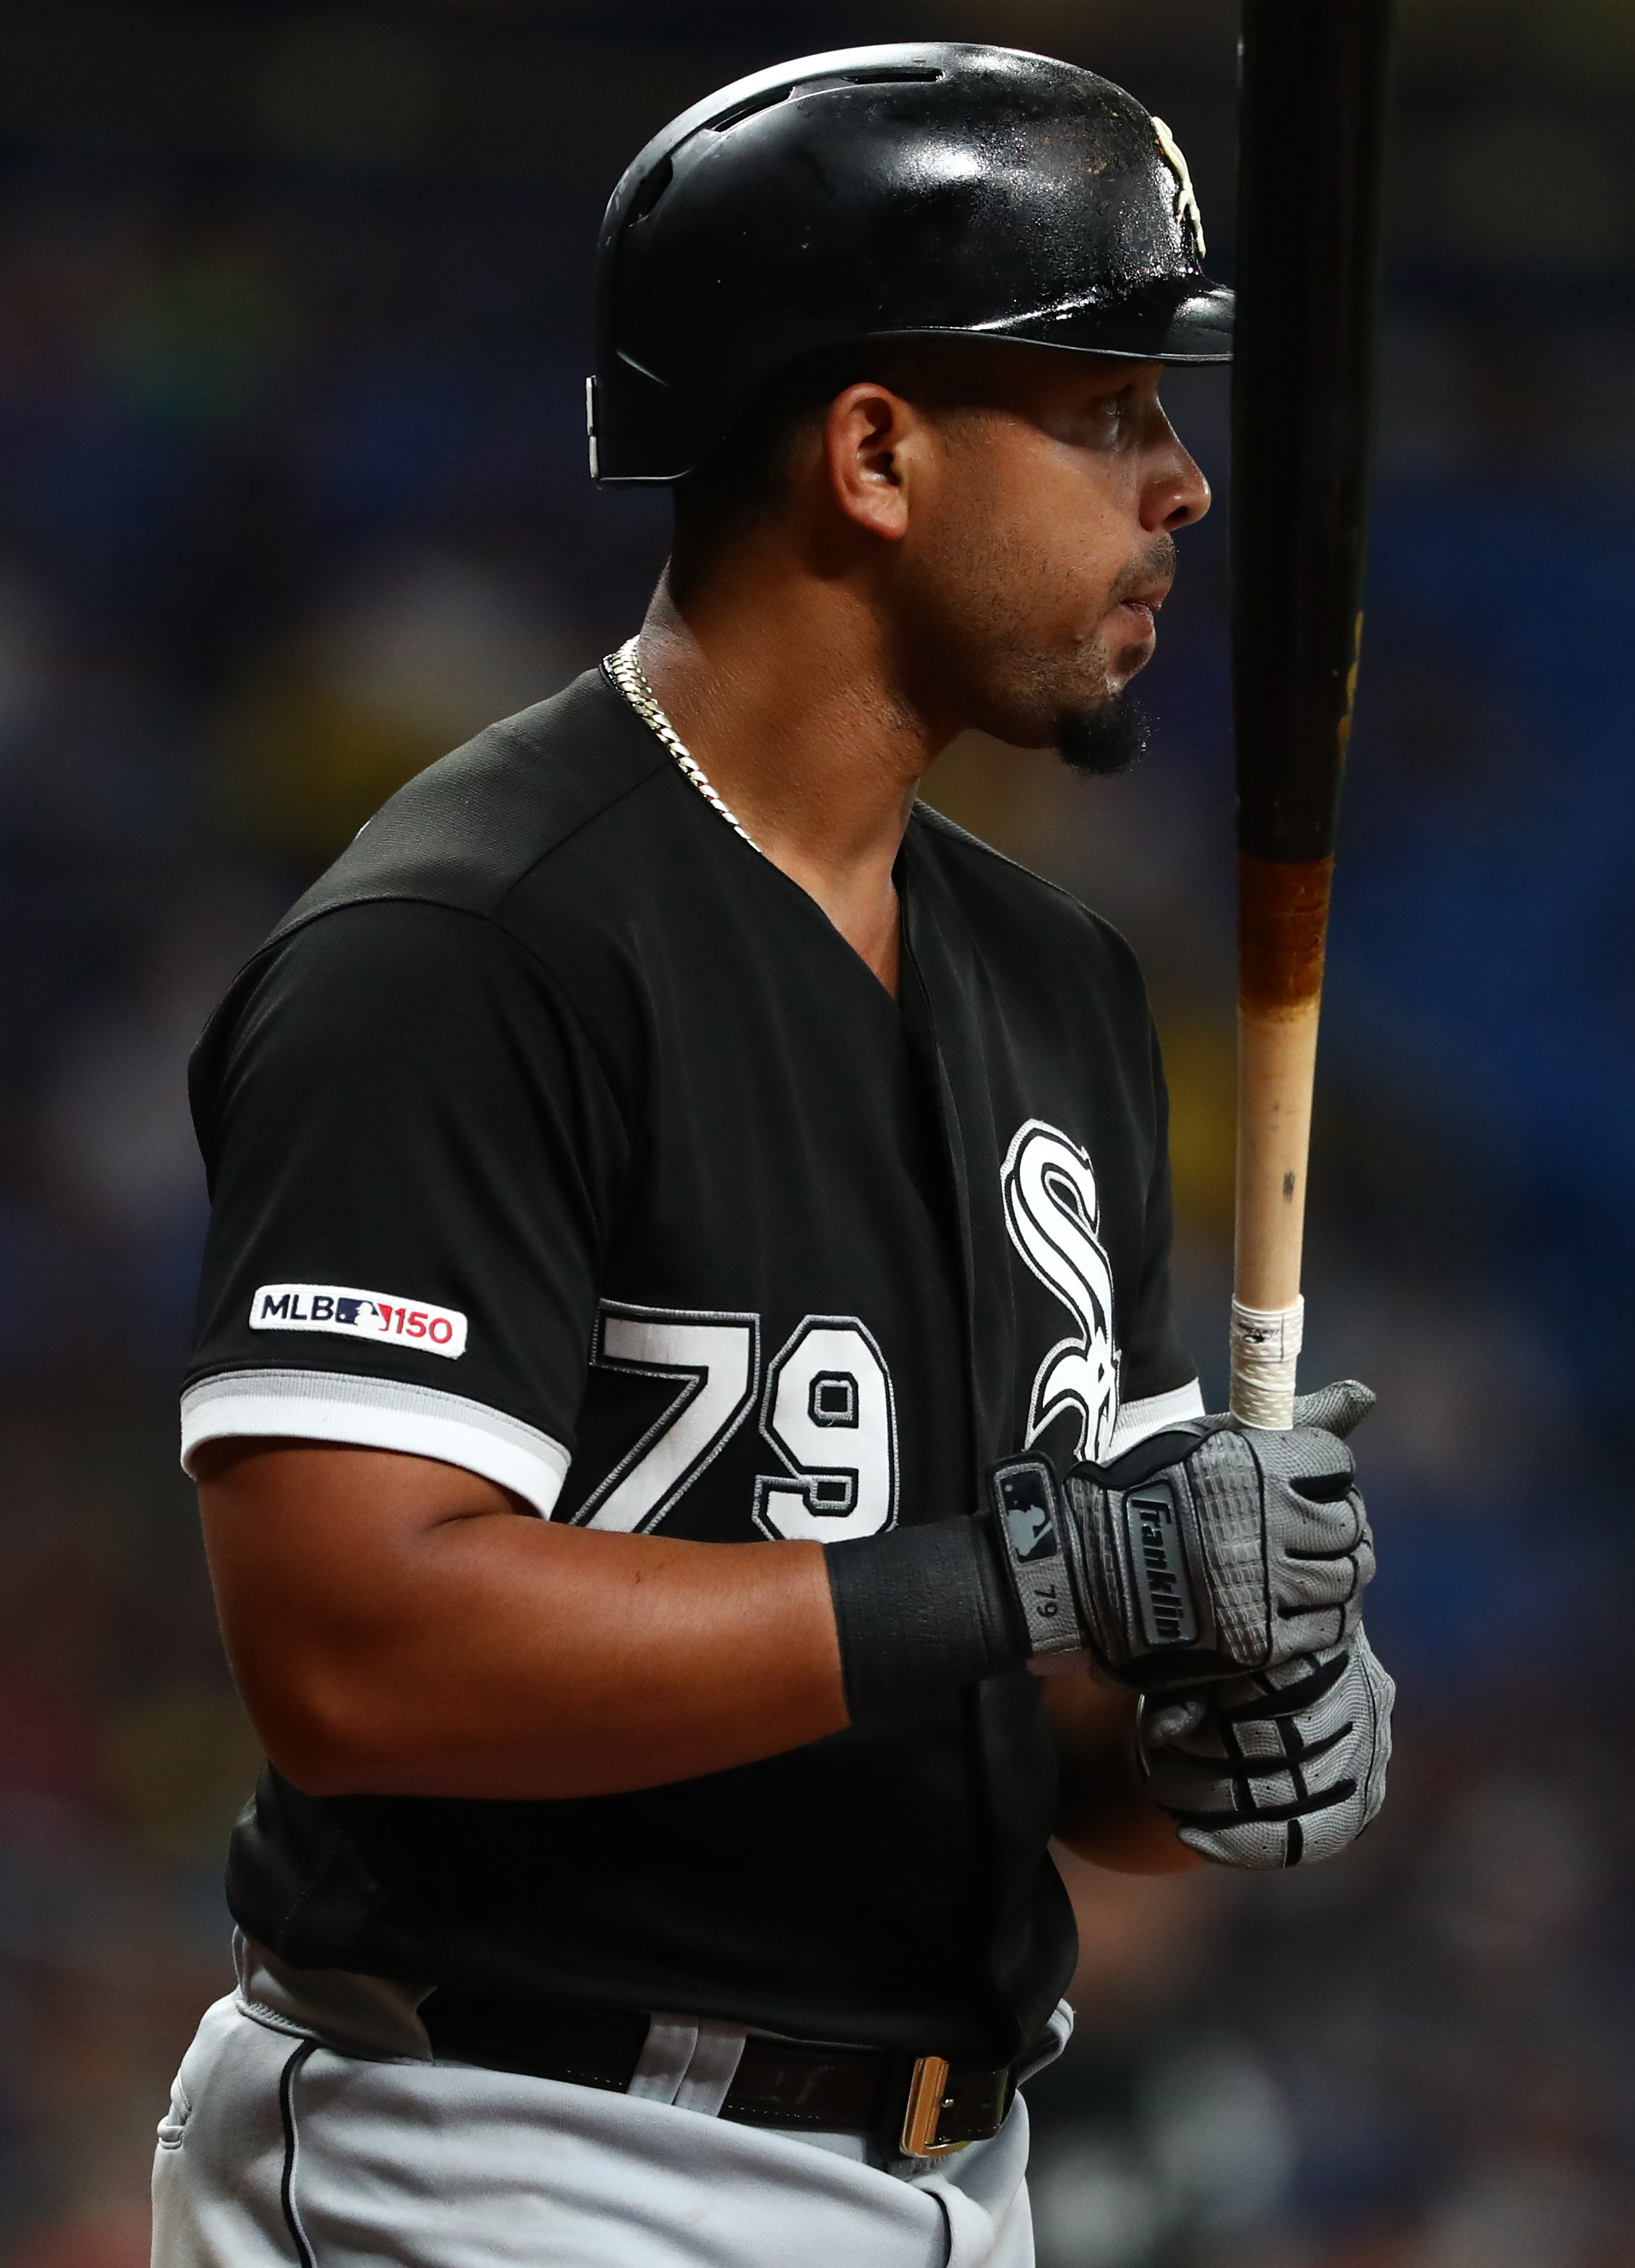 Is Jose Abreu's time with the White Sox over?